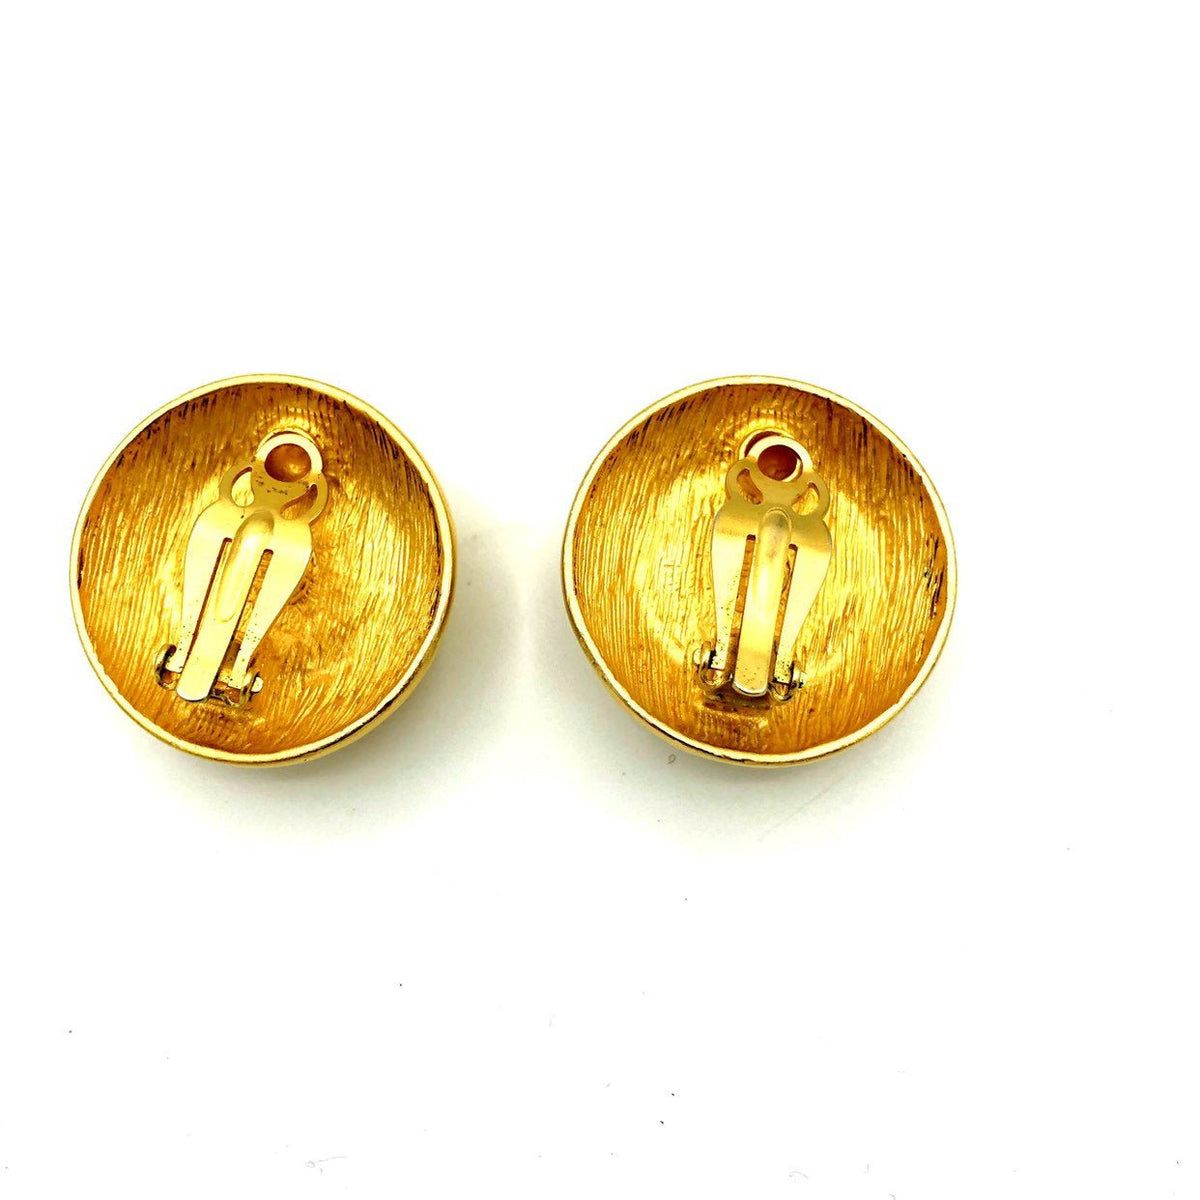 Givenchy Gold & Pearl Logo Paris France Pierced Earrings - 24 Wishes Vintage Jewelry